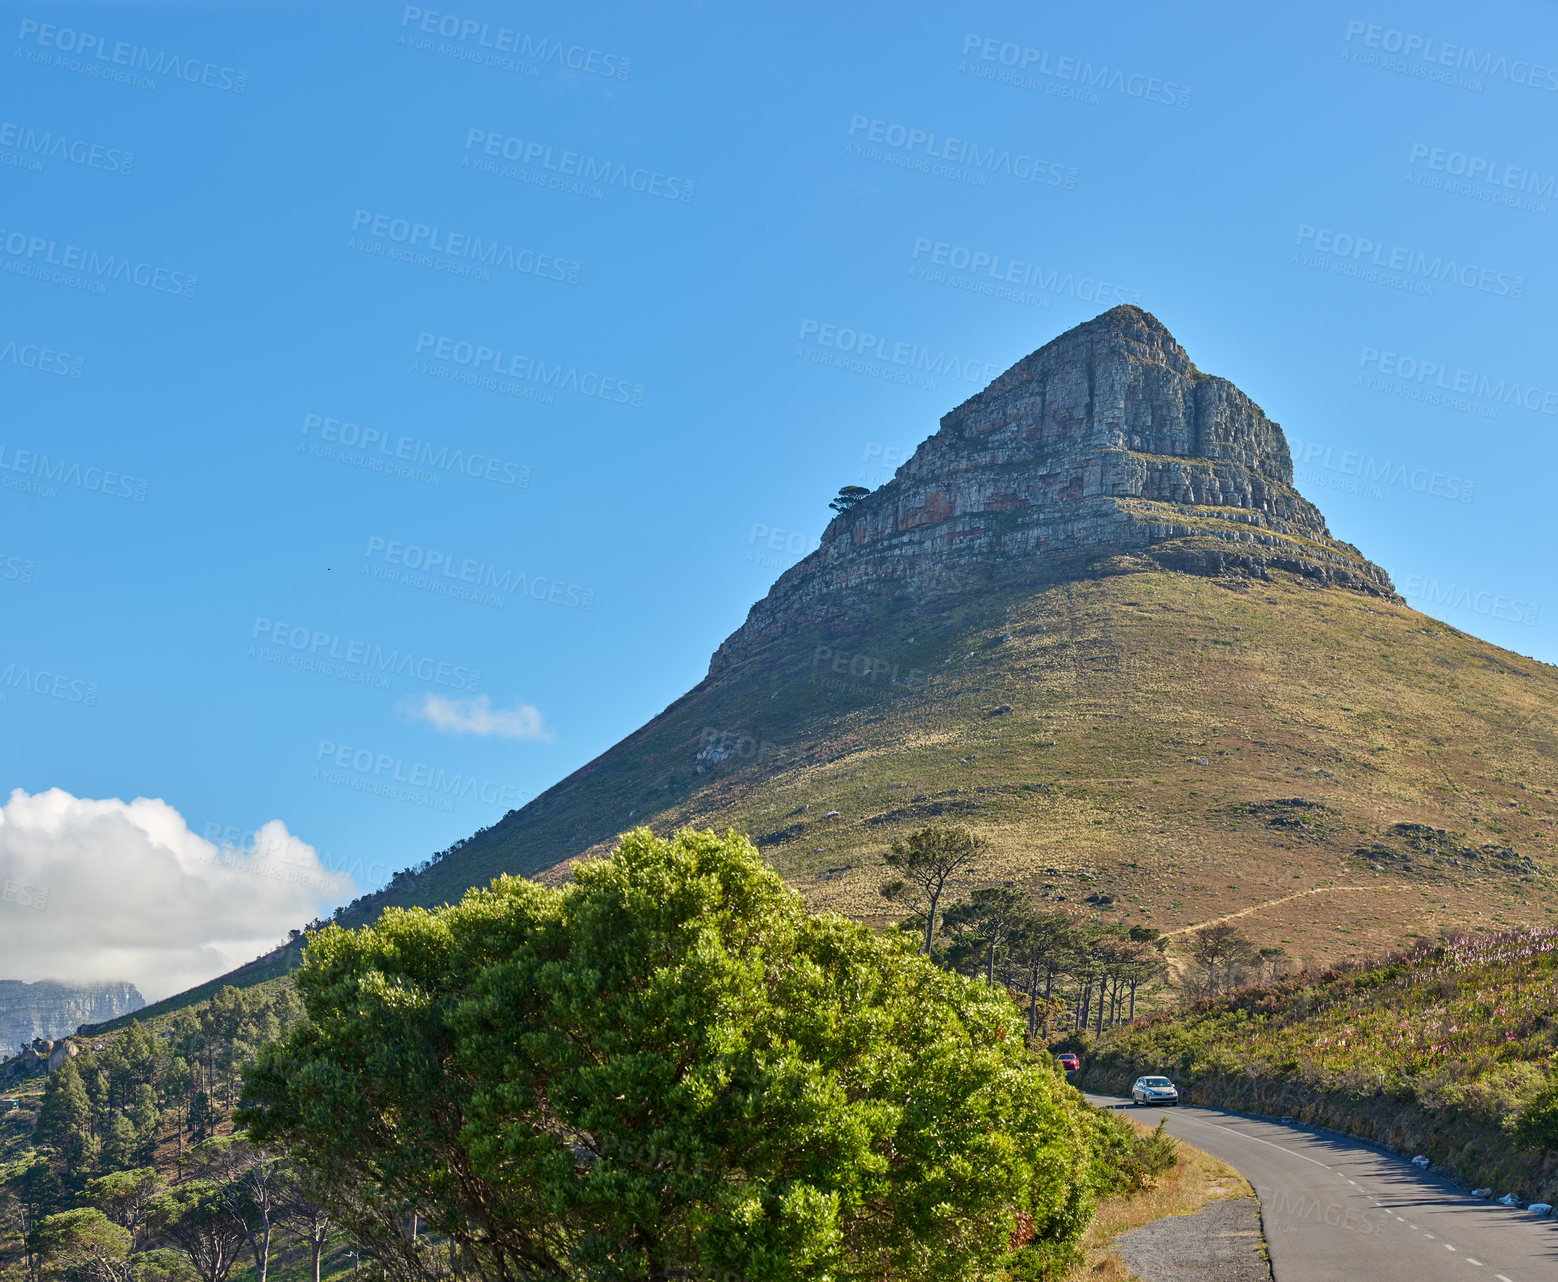 Buy stock photo Copy space with scenic landscape view of Lions Head mountain in Cape Town, South Africa against a blue sky background. Magnificent panoramic of an iconic landmark to travel, explore and pass by road